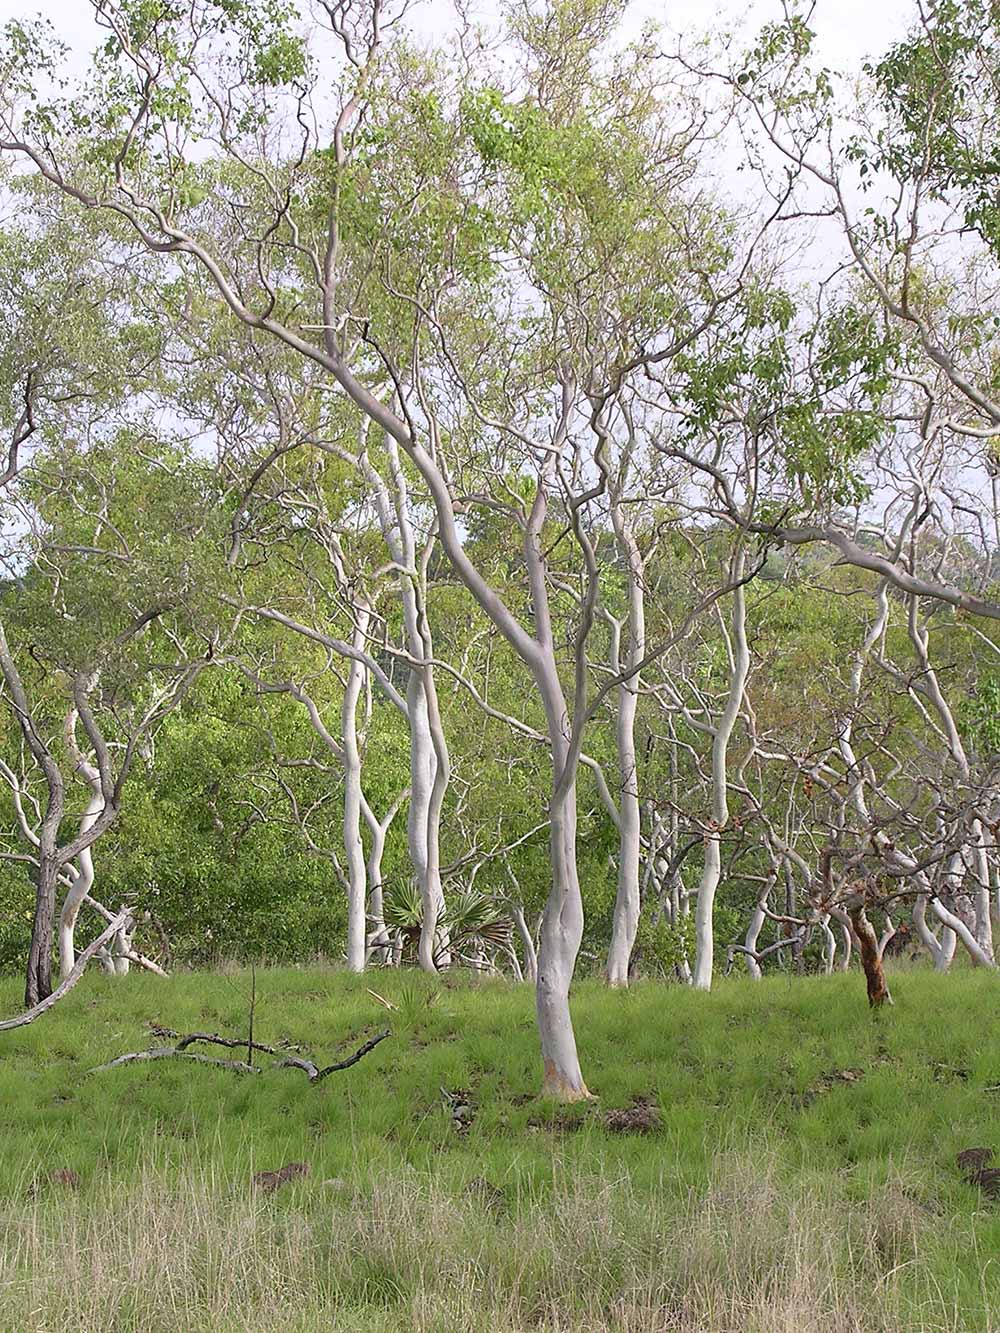 Gum trees with grey-white trunks.